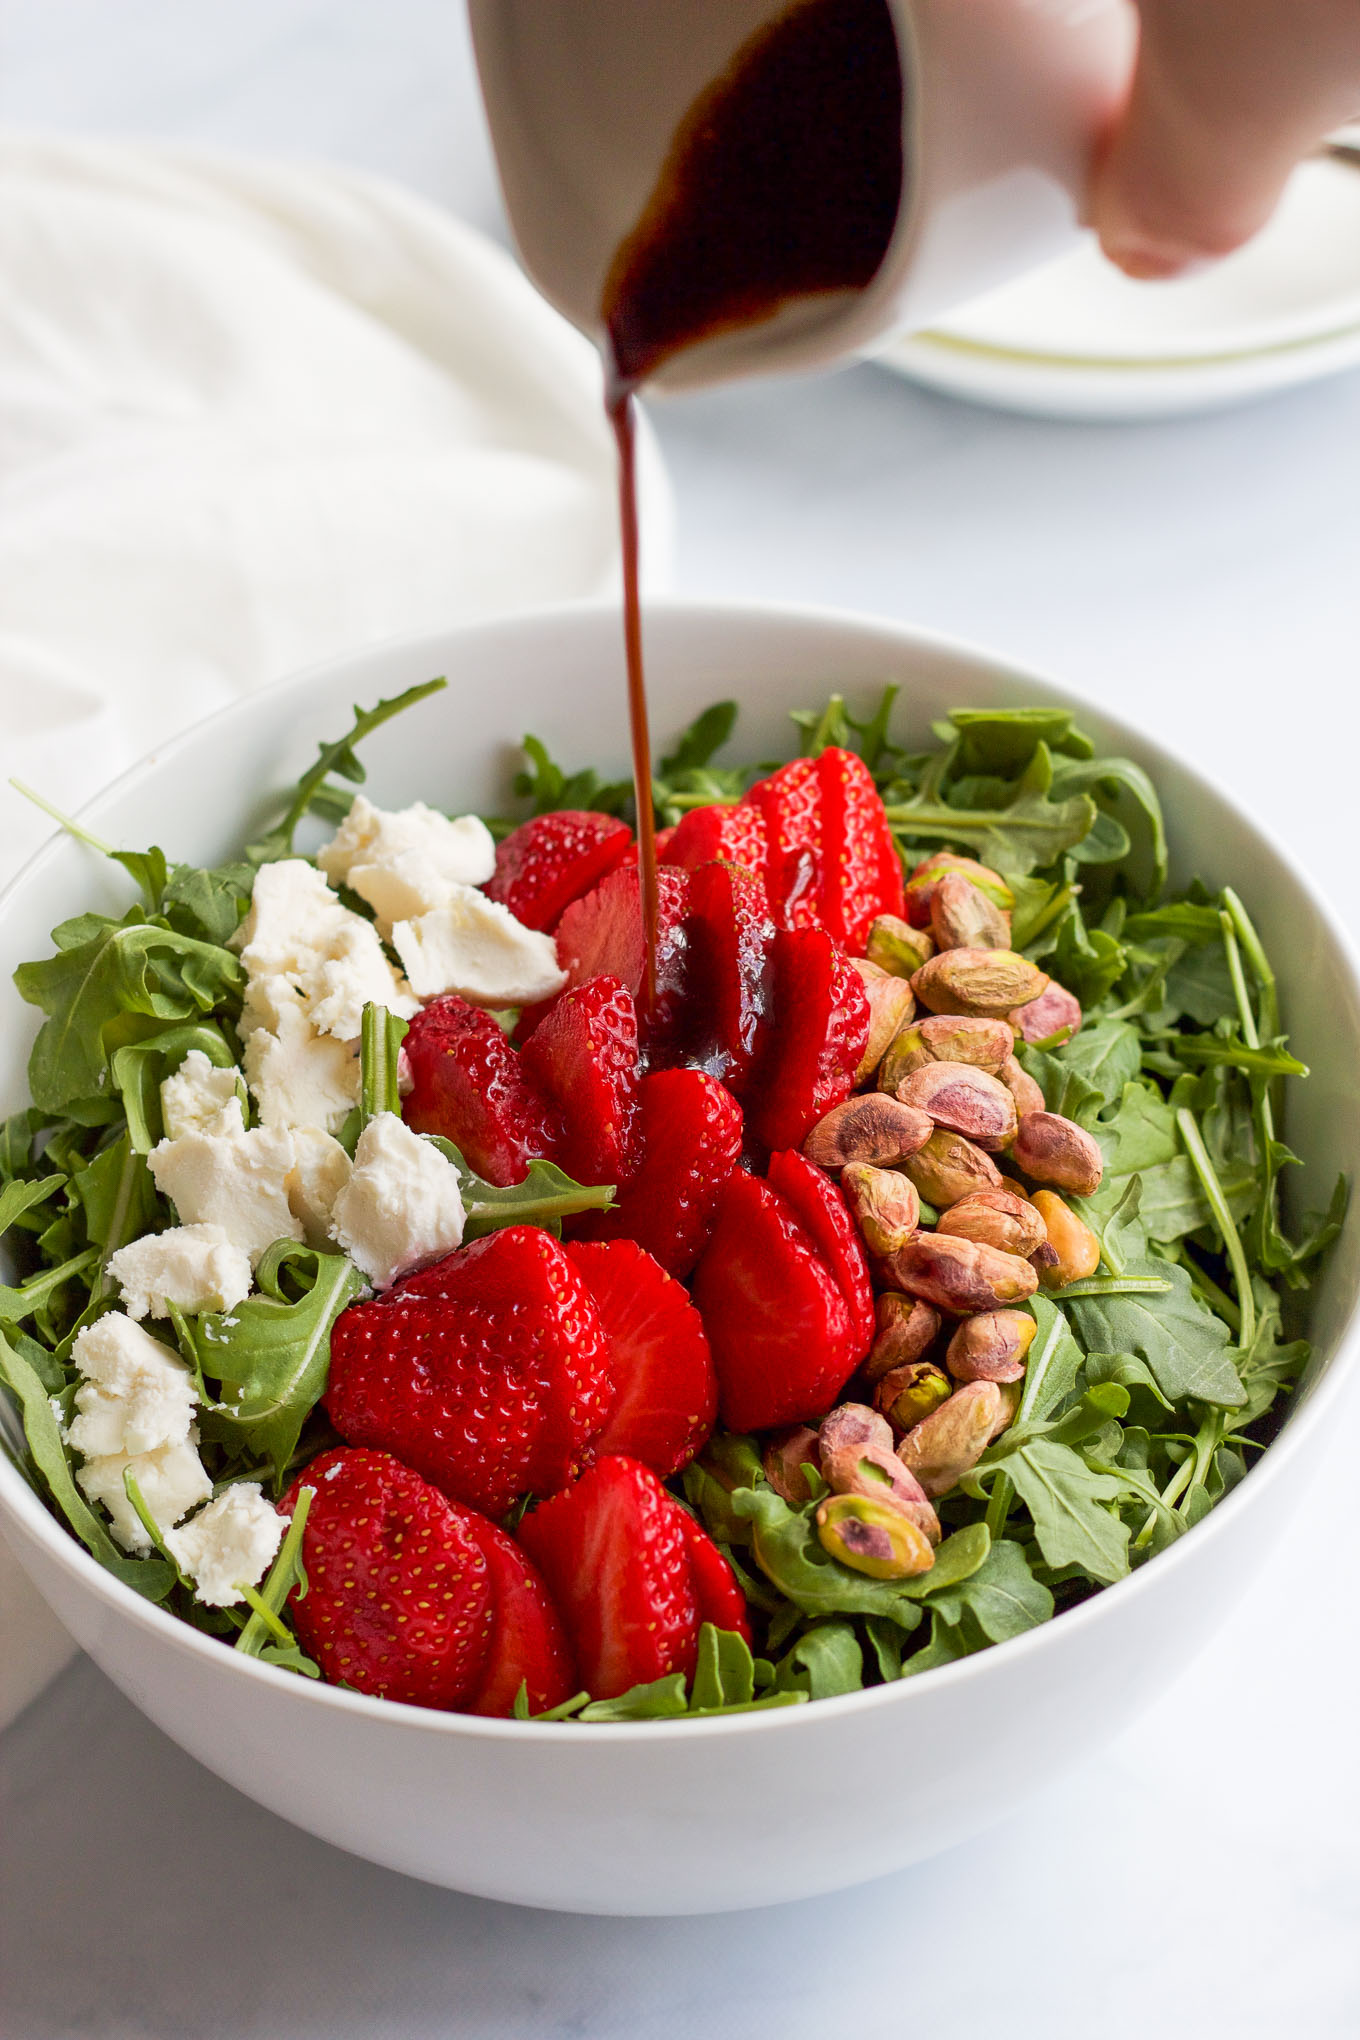 Arugula Salad with Strawberries, Pistachios and Goat Cheese